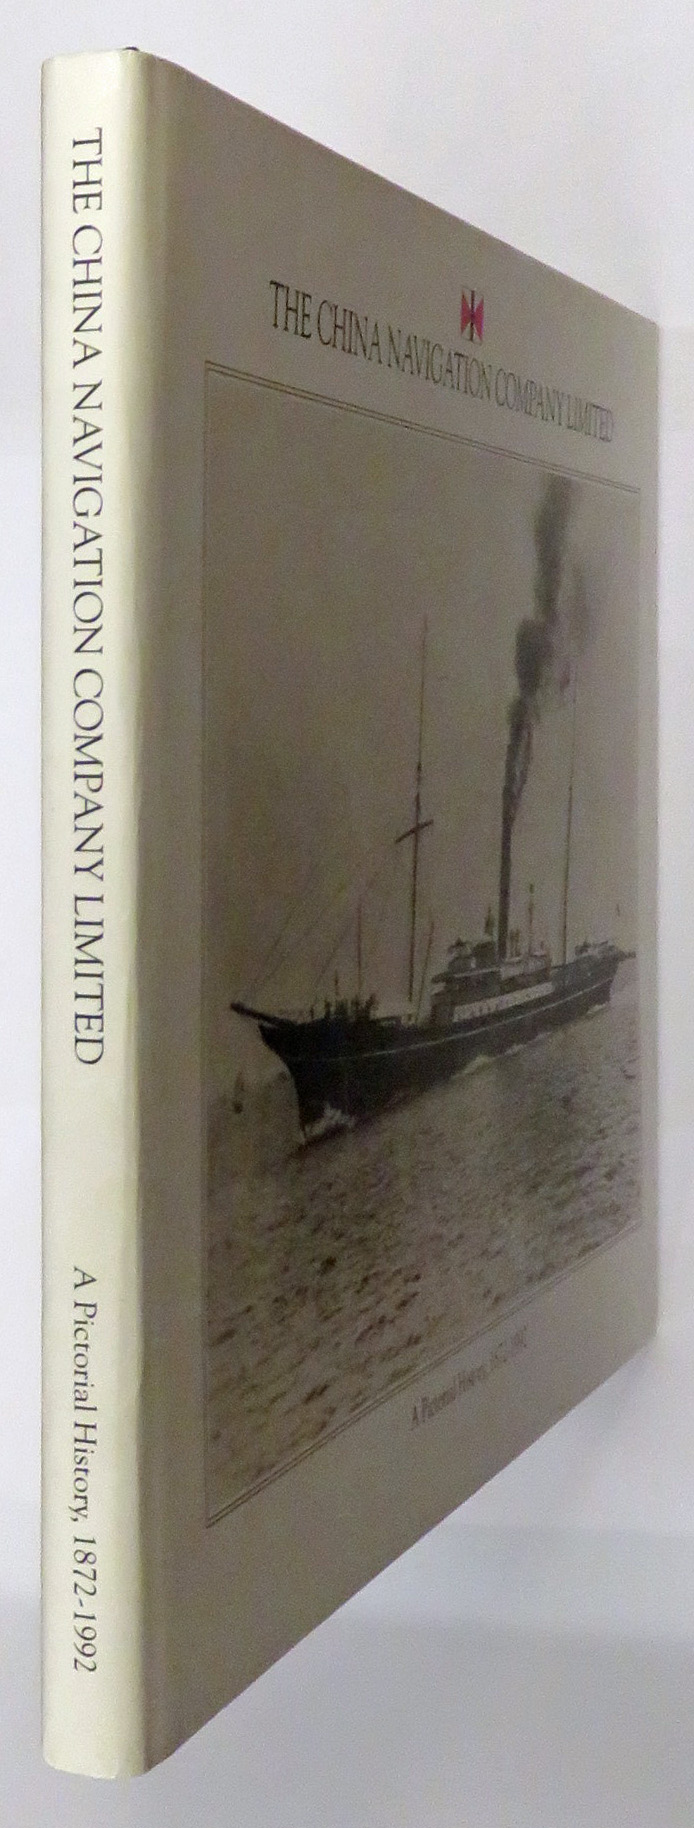 The China Navigation Company Limited A Pictorial History 1872-1992